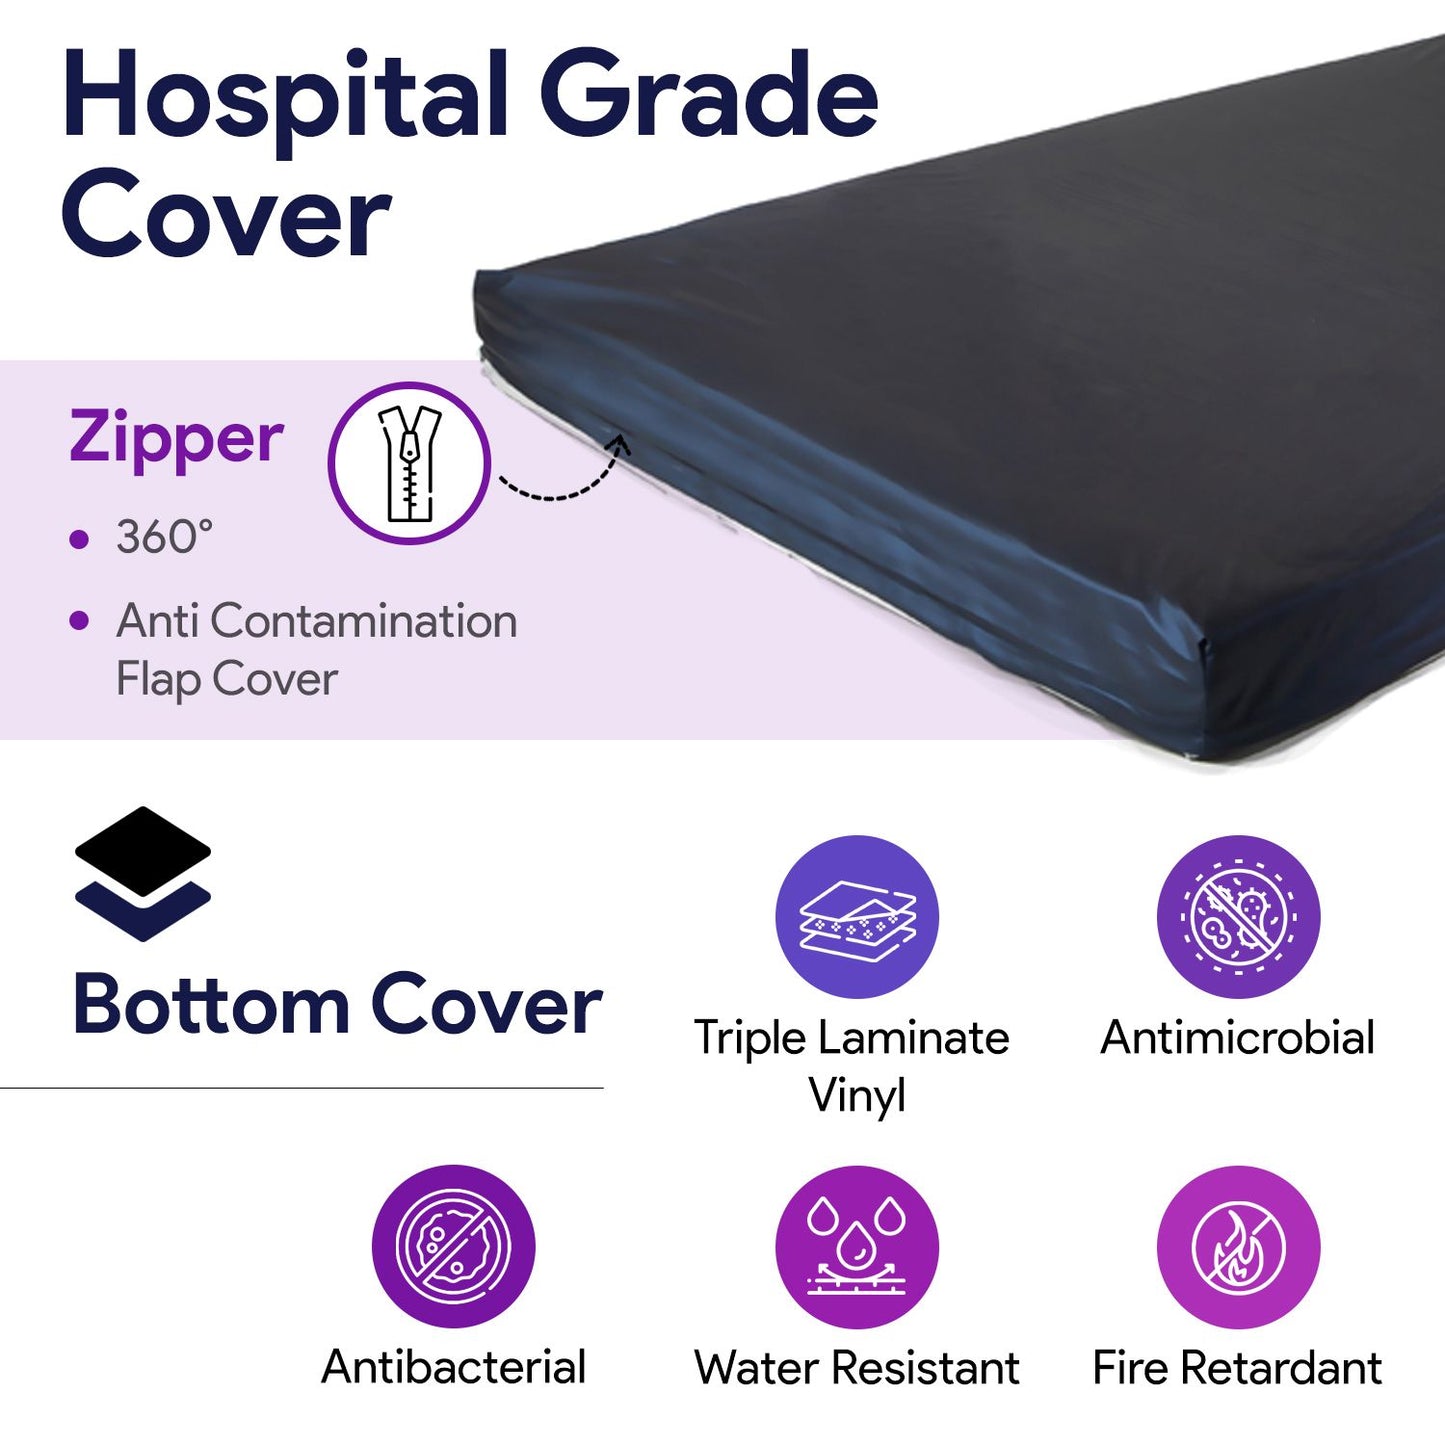 High Density Bariatric Foam Hospital Bed For Bed Sore Prevention